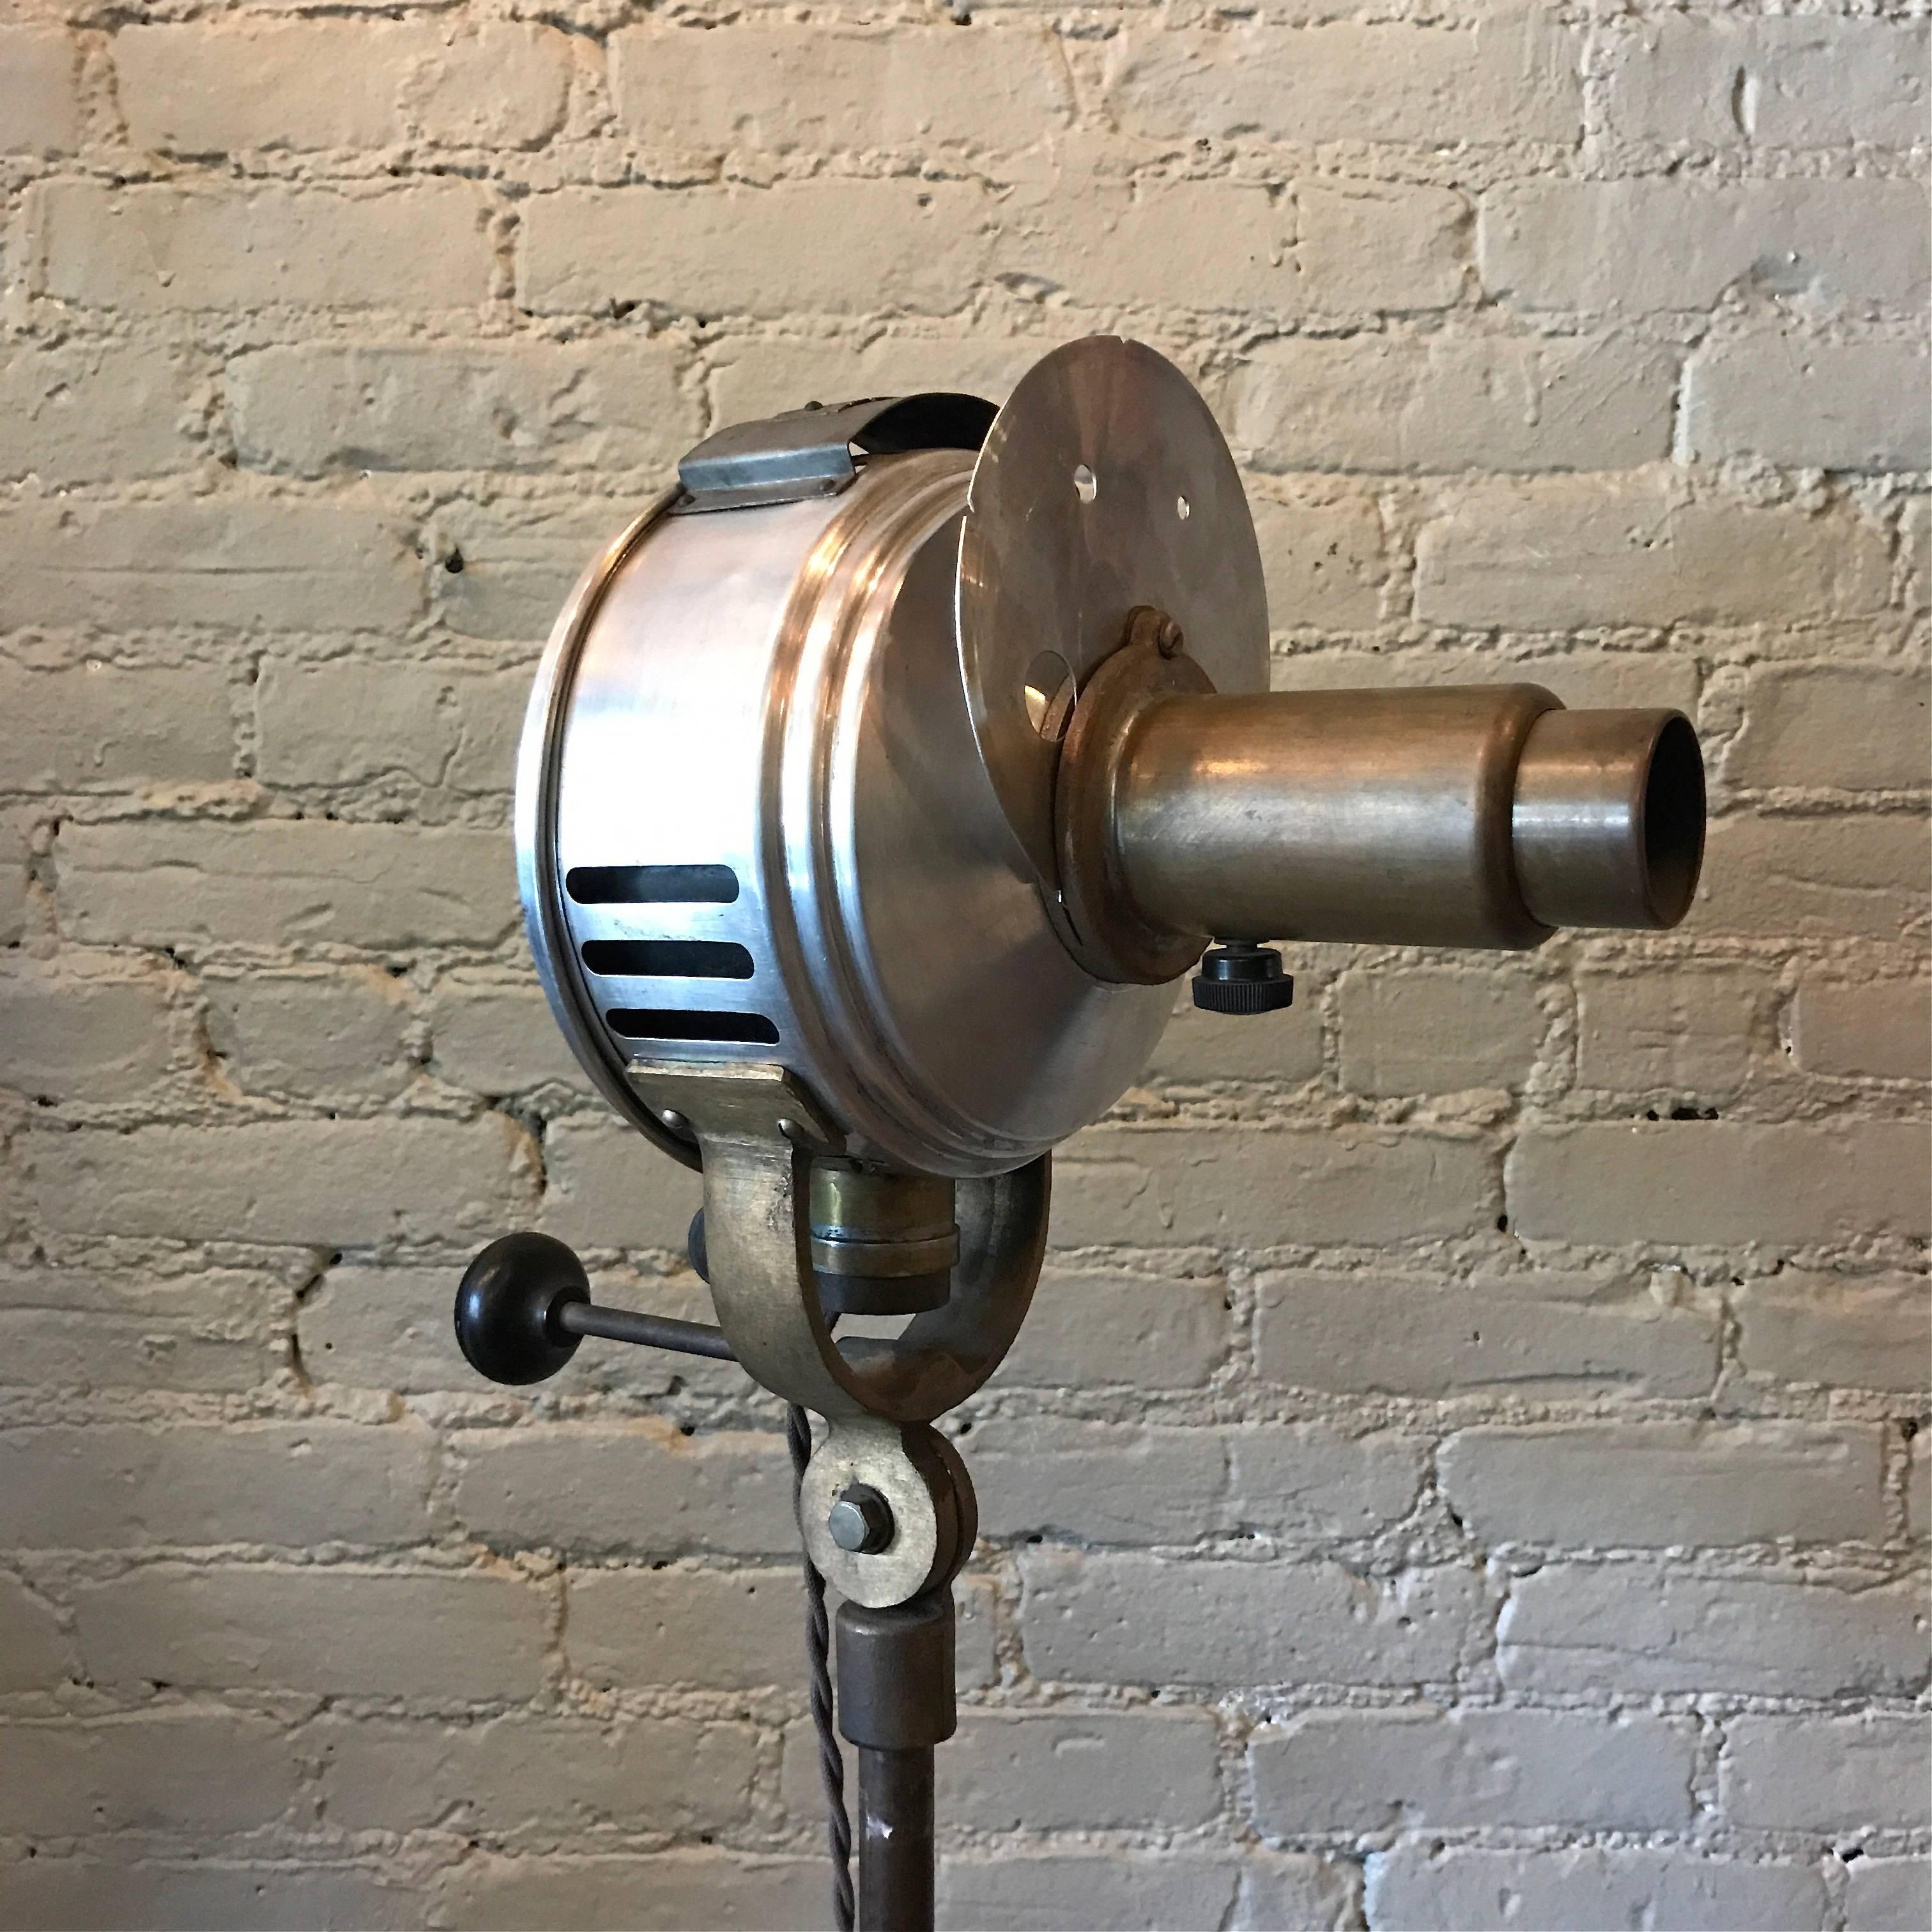 Industrial, machine age, medical, optical, floor lamp features a brass and steel head with cast iron base manufactured by Prometheus Electric Corp., New York is height adjustable 48 in - 64 in, articulating and casts a focused pin spot light.

   